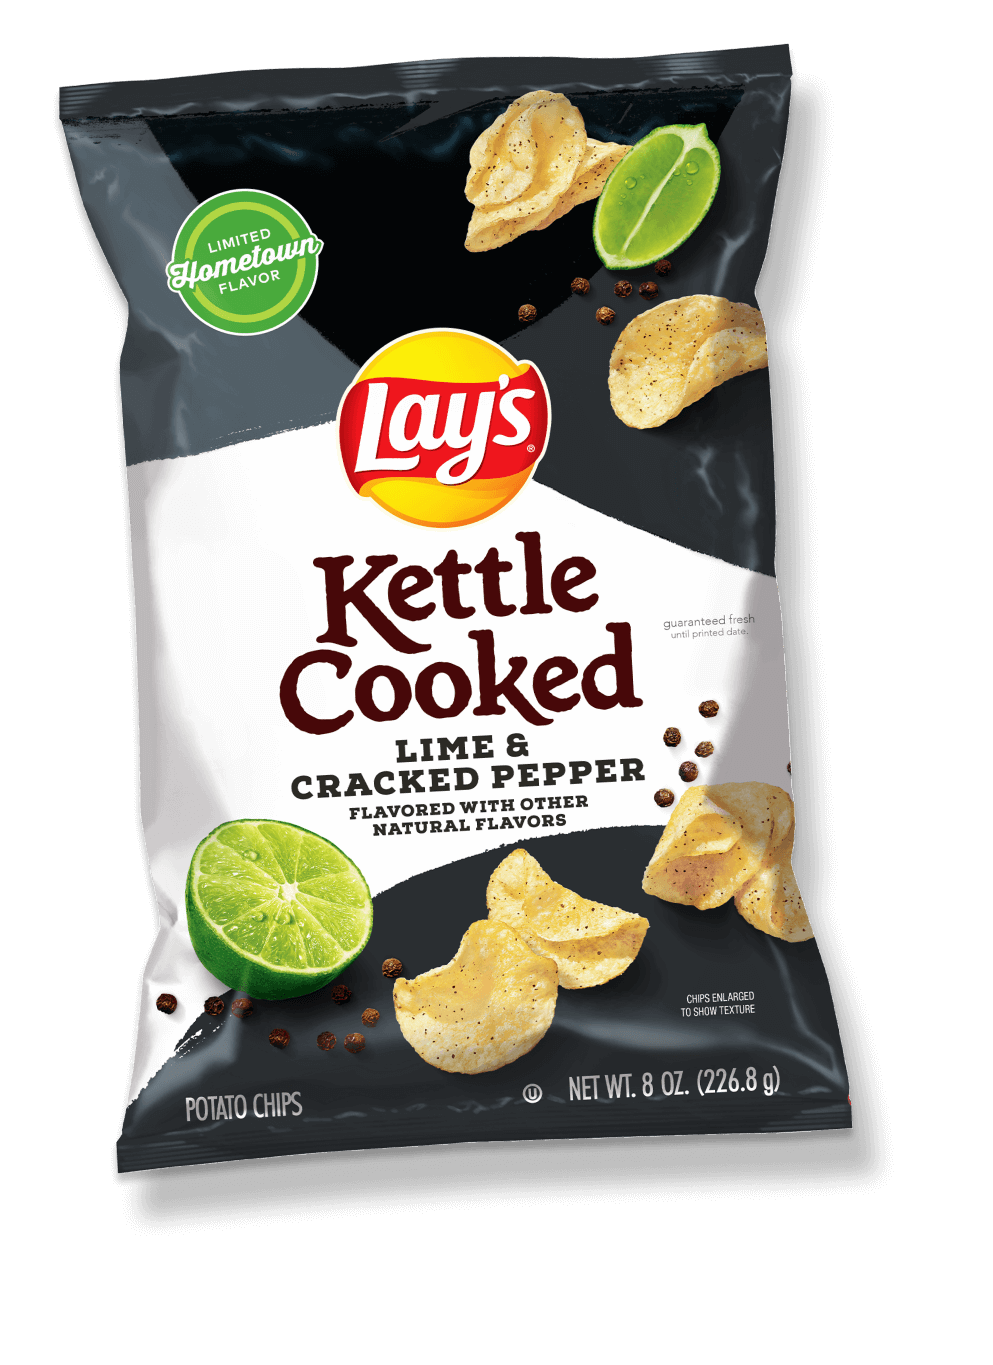 Lay's Kettle Cooked Lime & Pepper chips bag.